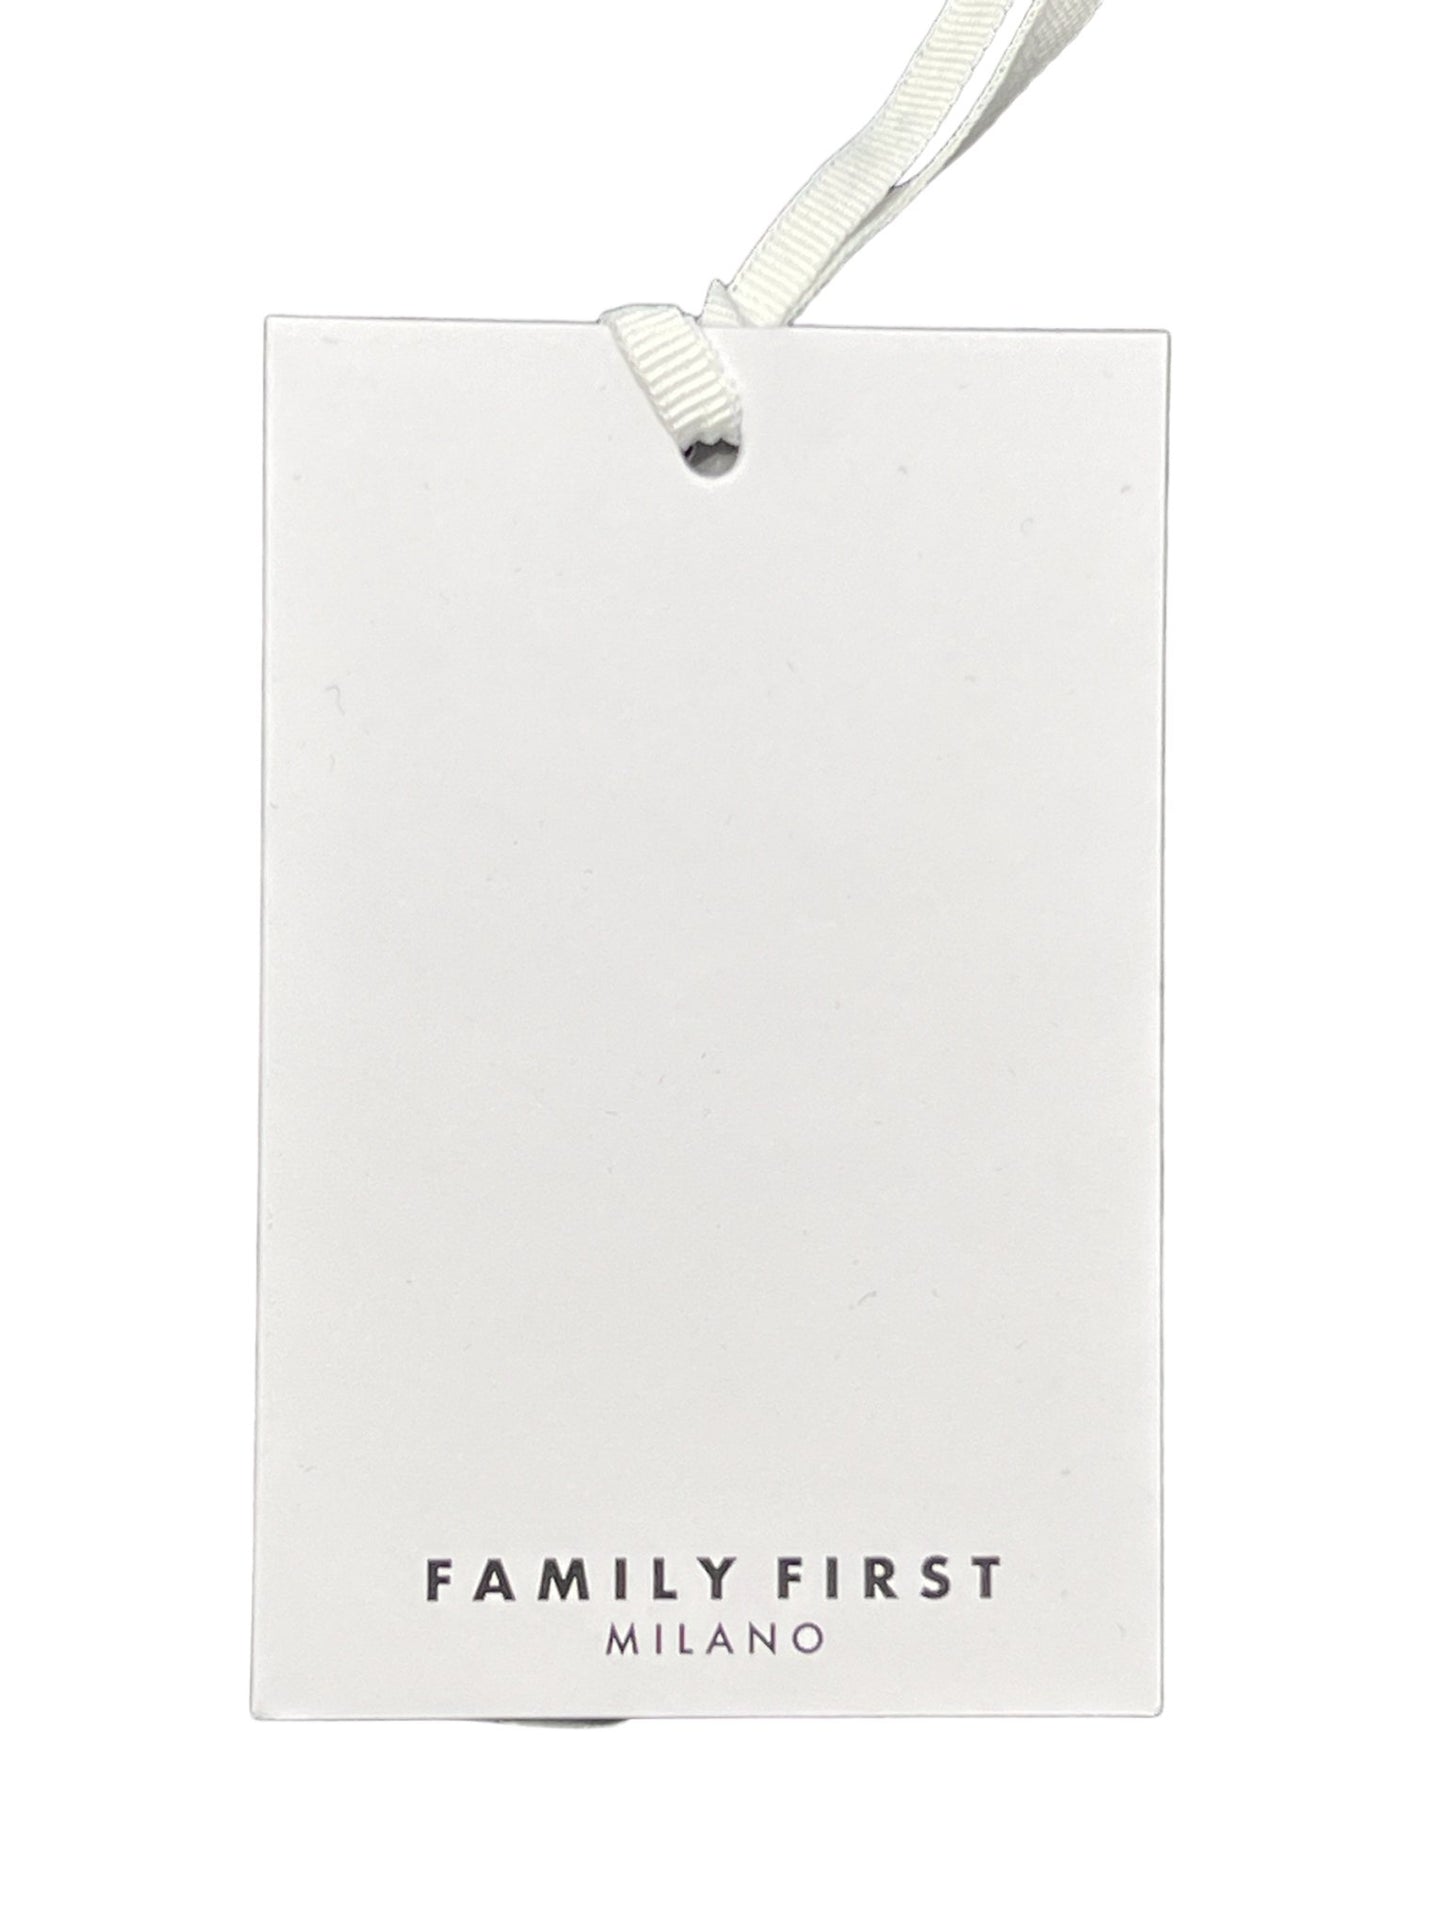 A white tag with the words "FAMILY FIRST TS2415 T-SHIRT BEVERLY HILLS PK" printed at the bottom, attached to a silver grommet and white ribbon, isolated against a black background.